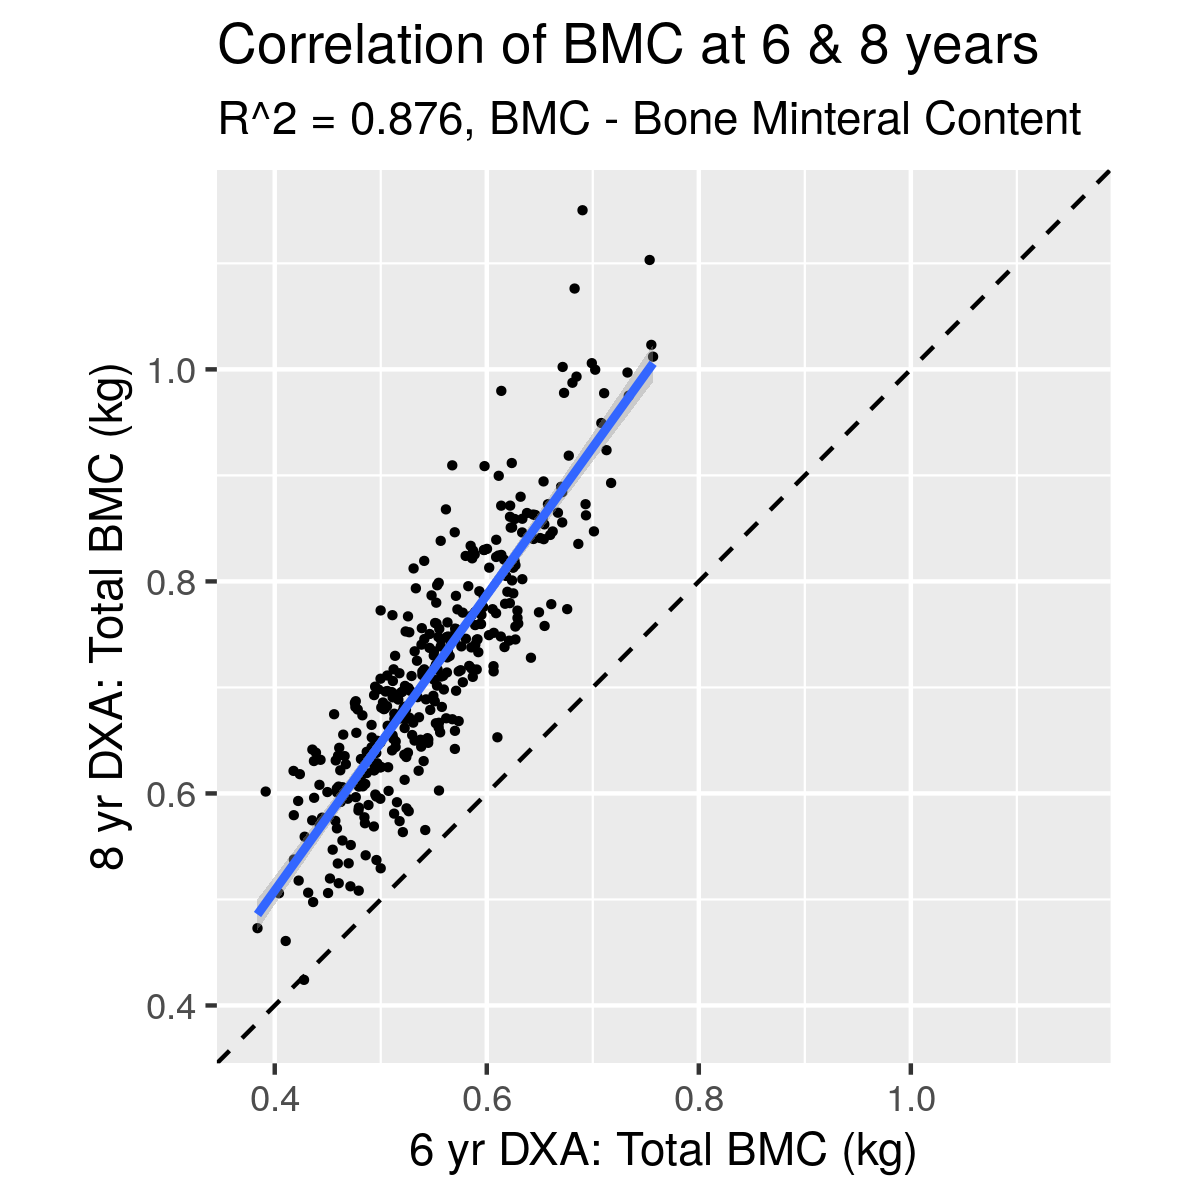 Bone Mineral content at 6 and 8 years of are correlated with an \(R^2 = 0.88\).